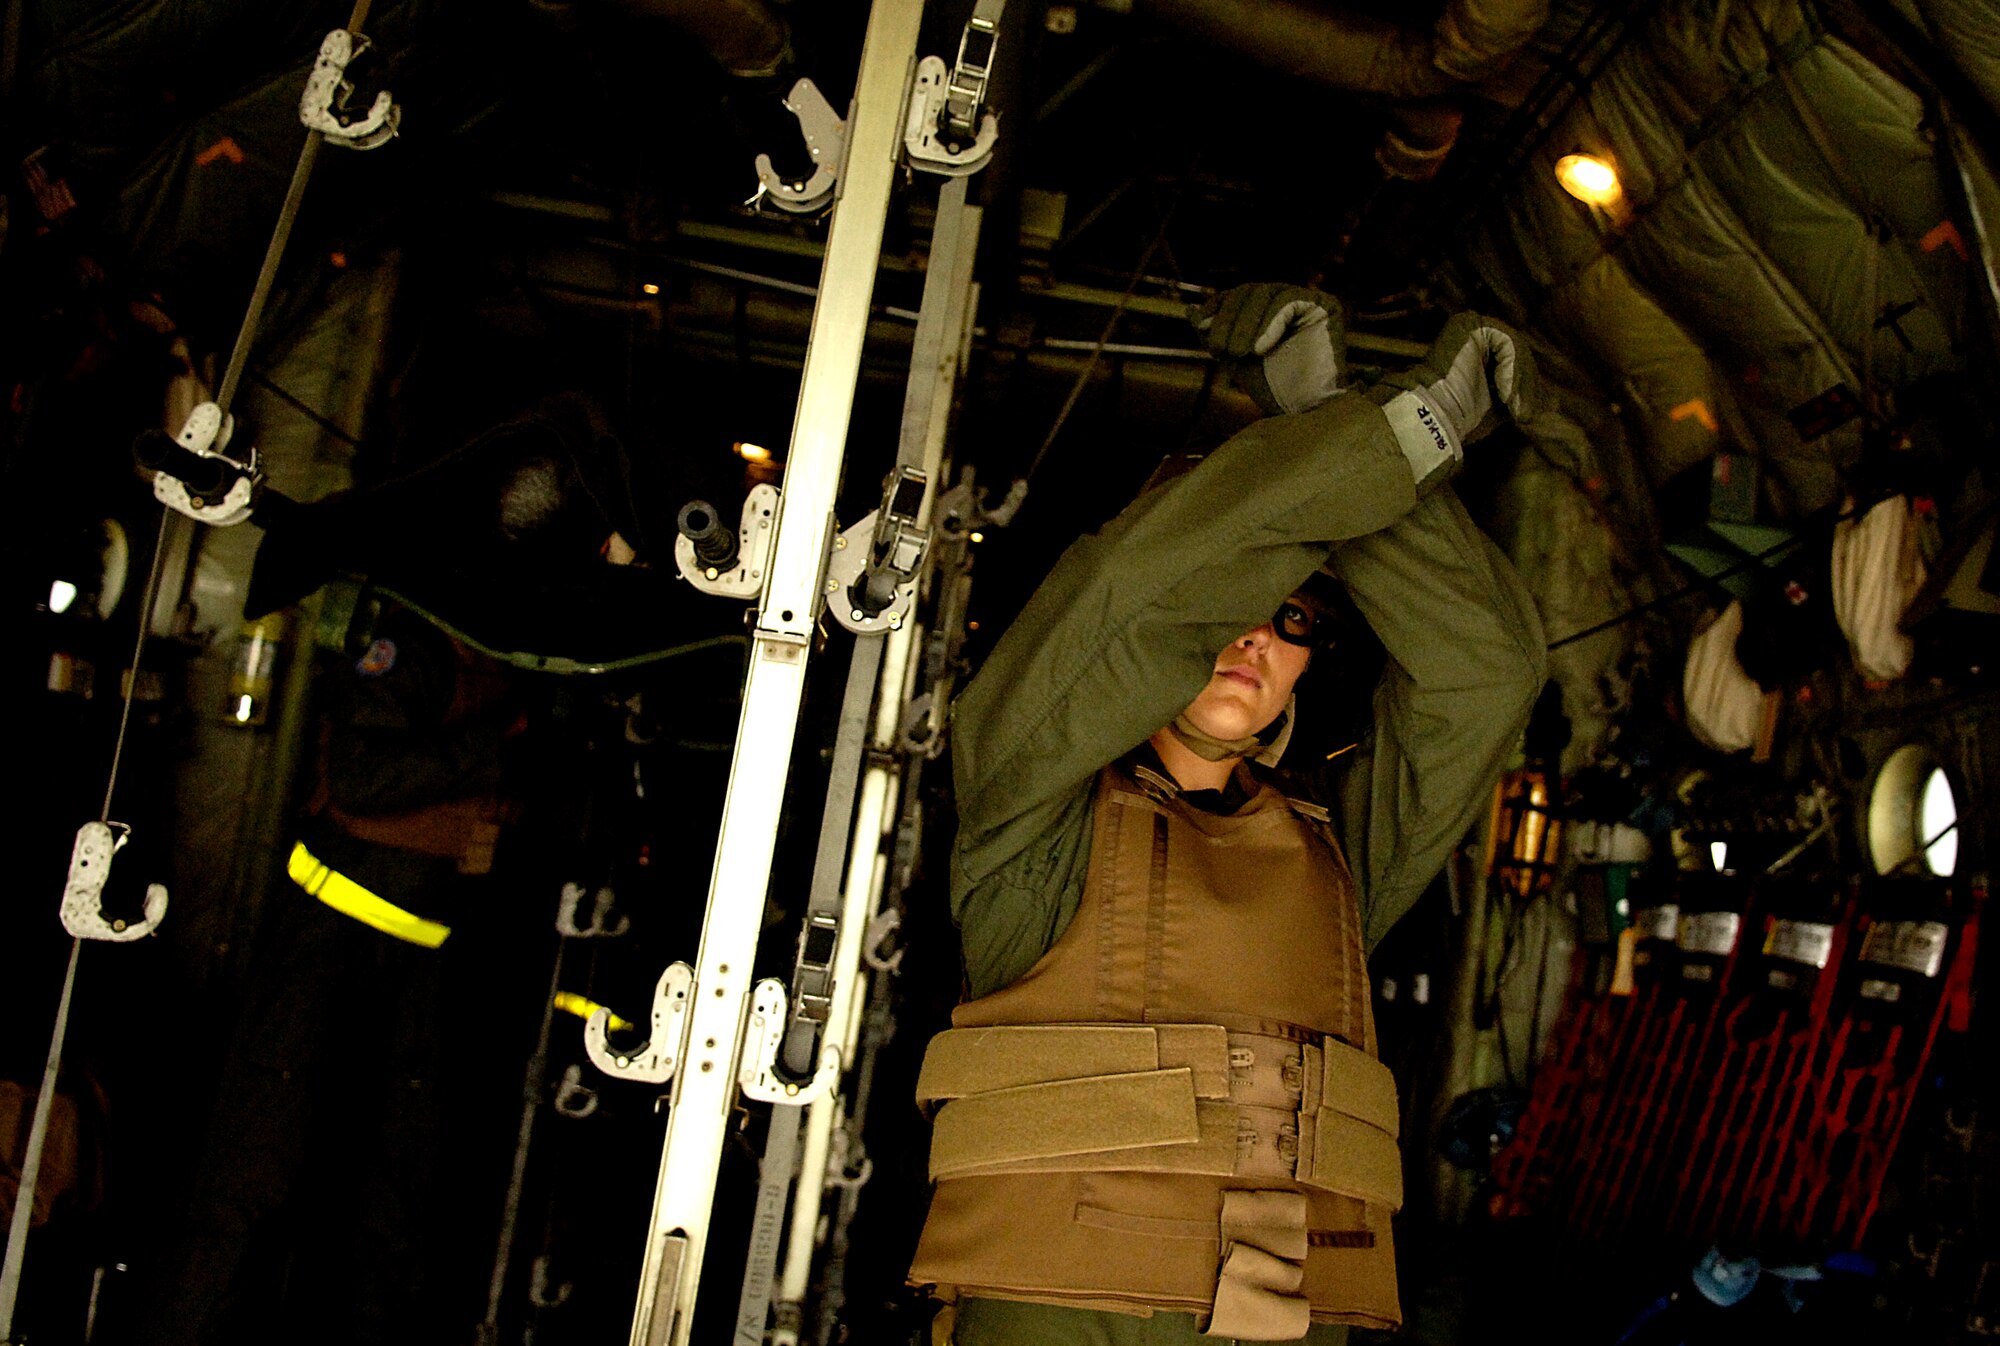 Capt. Lisa Palmer directs her team as they load mock patients aboard a C-130 Hercules for the aeromedical evacuation competition July 23 during Air Mobility Command's Rodeo 2007 at McChord Air Force Base, Wash. Rodeo 2007 is a readiness competition of U.S. and international mobility air forces. Captain Palmer is the medical crew director and is assigned to the 375th Aeromedical Evacuation Squadron at Scott AFB, Ill. (U.S. Air Force photo/Tech. Sgt. Jeremy T. Lock)
